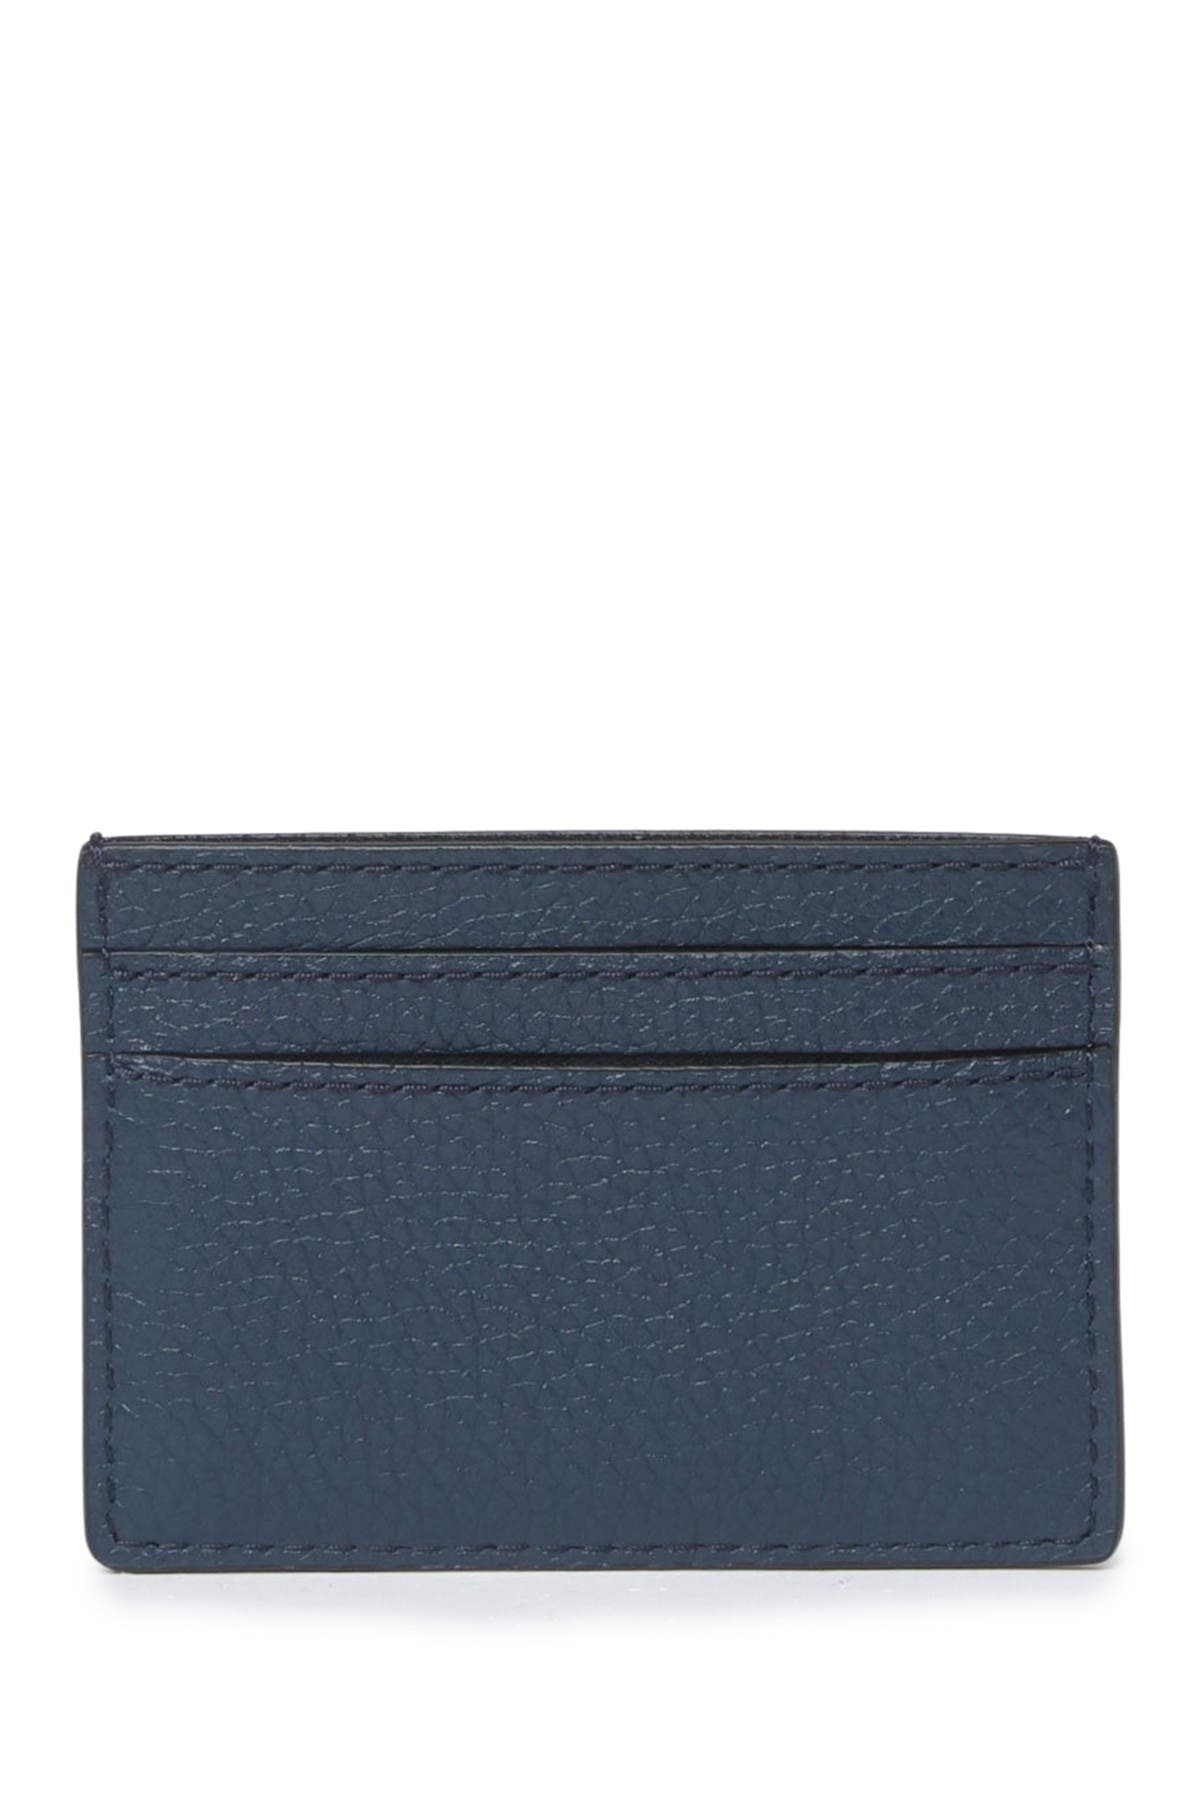 Marc Jacobs | Empire City Leather Card Case | Nordstrom Rack